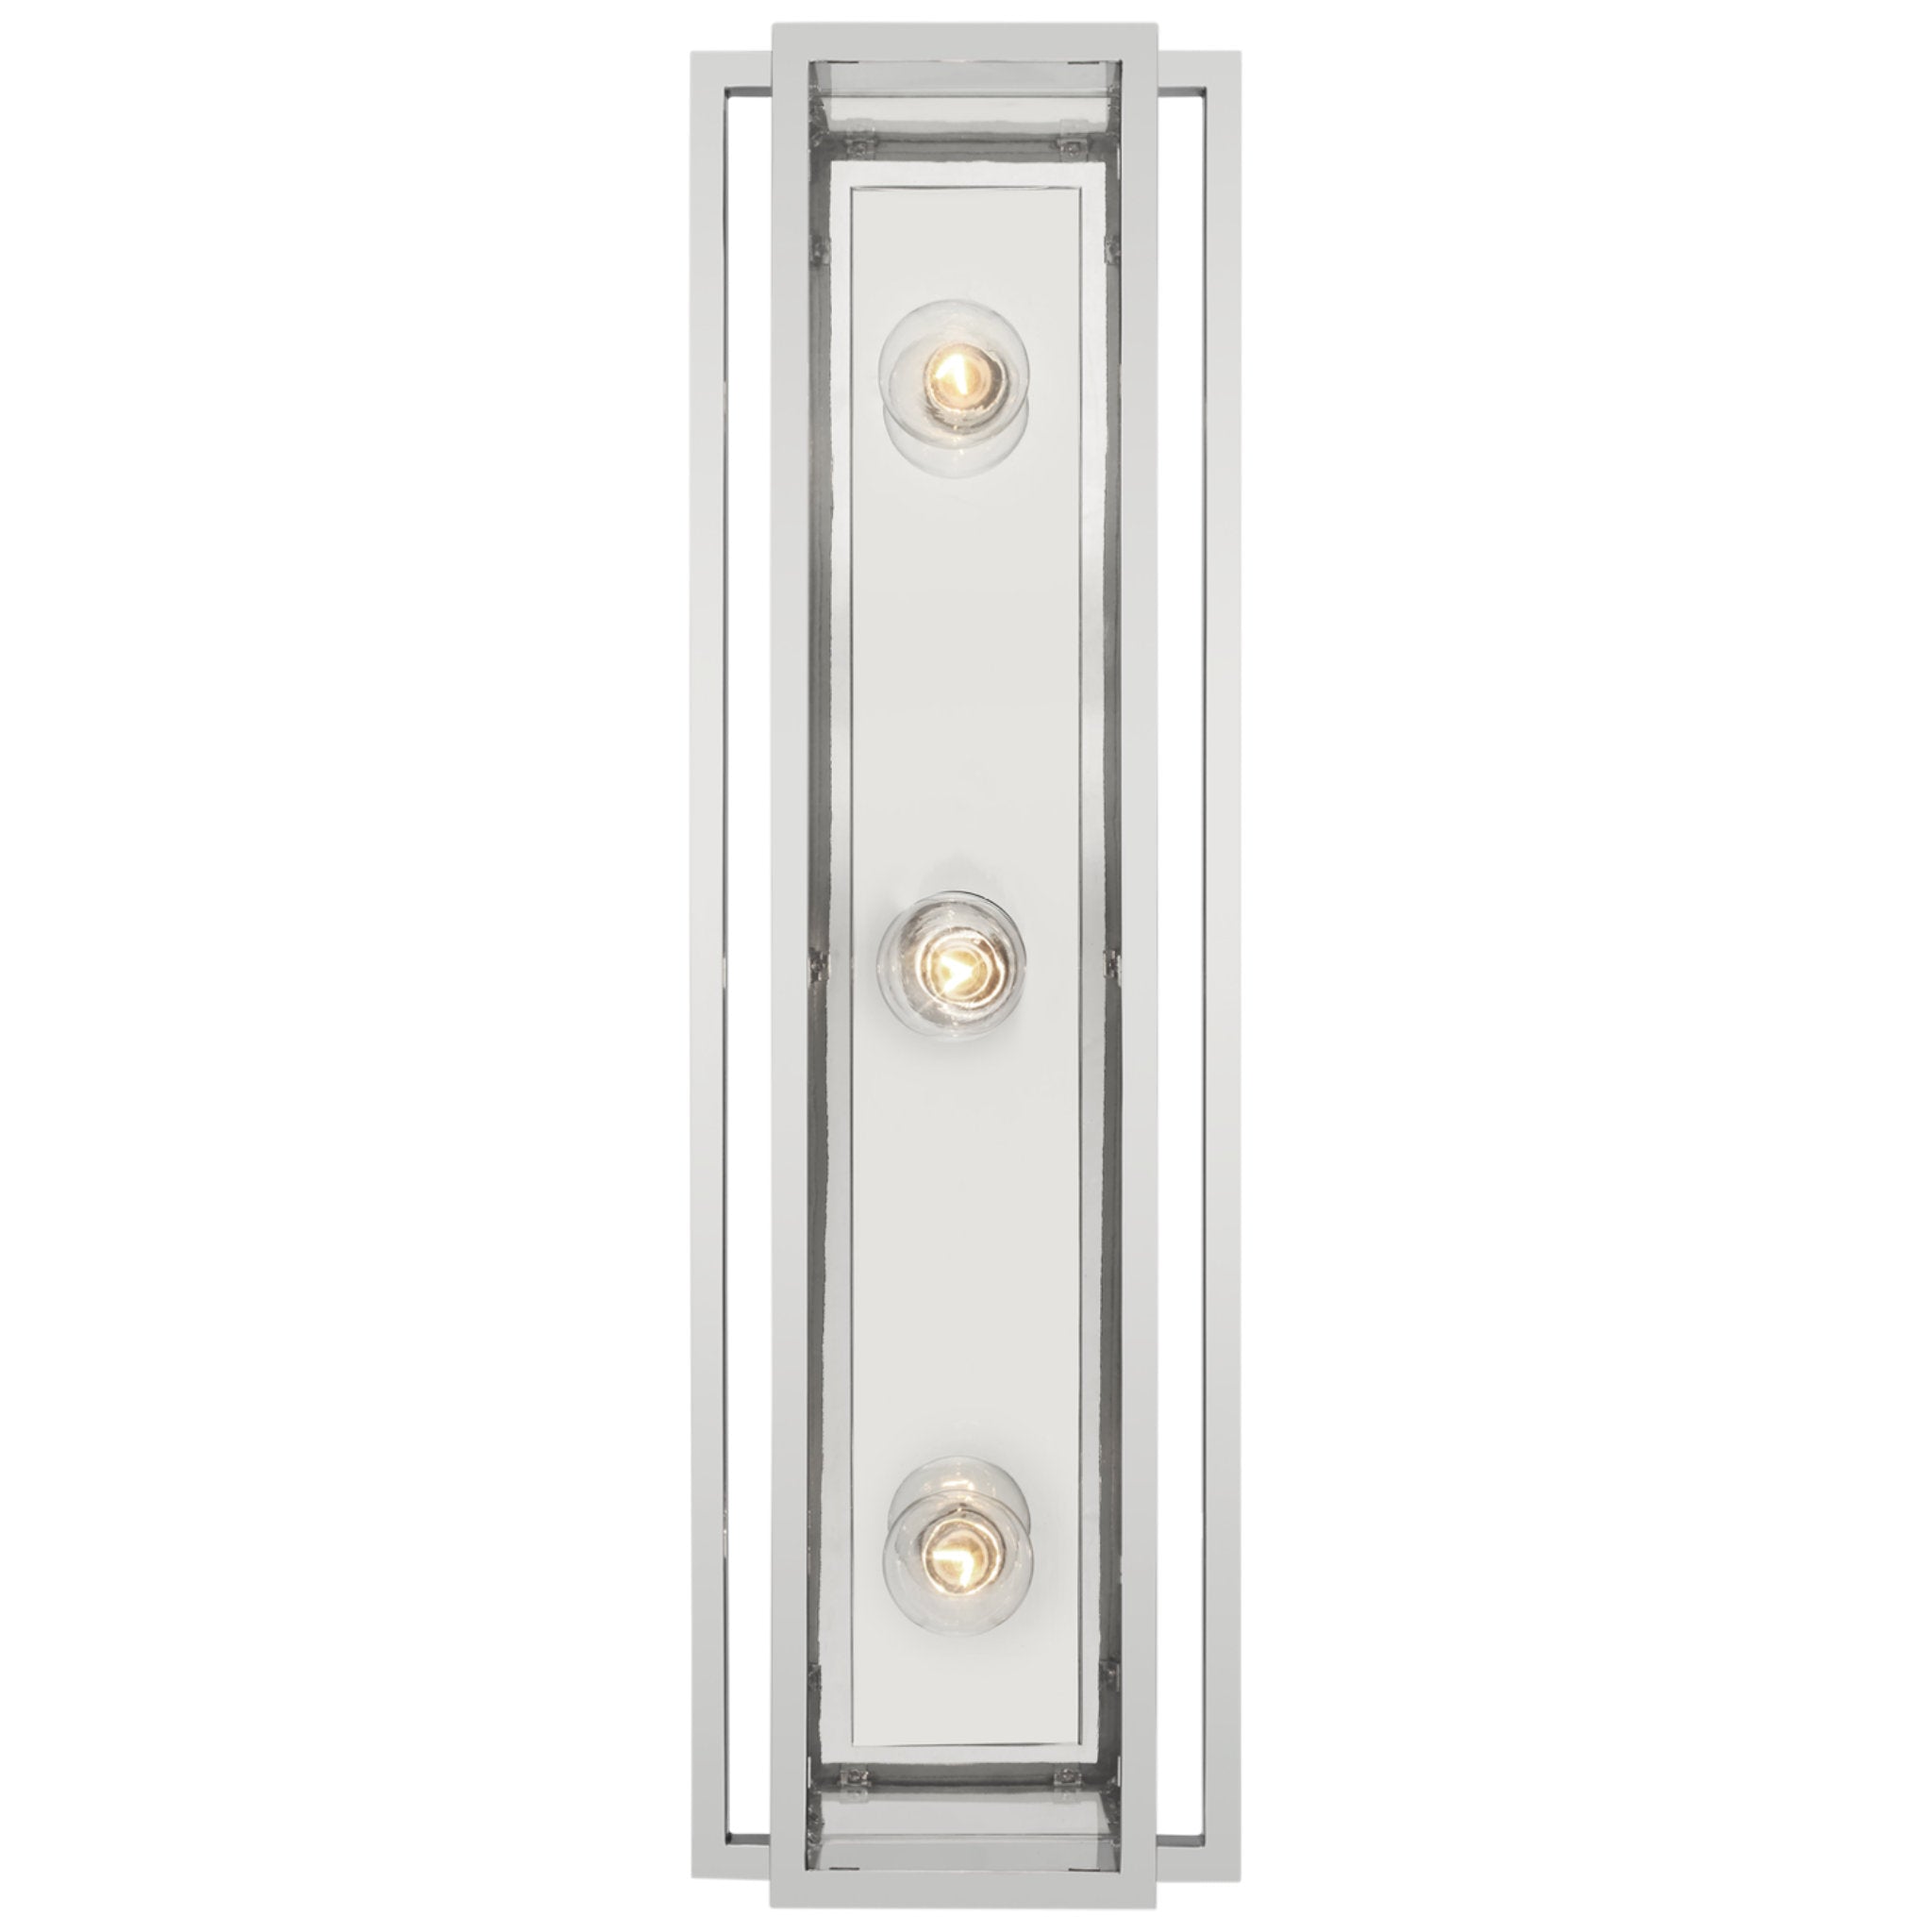 Ian K. Fowler Halle 24" Vanity Light in Polished Nickel with Clear Glass